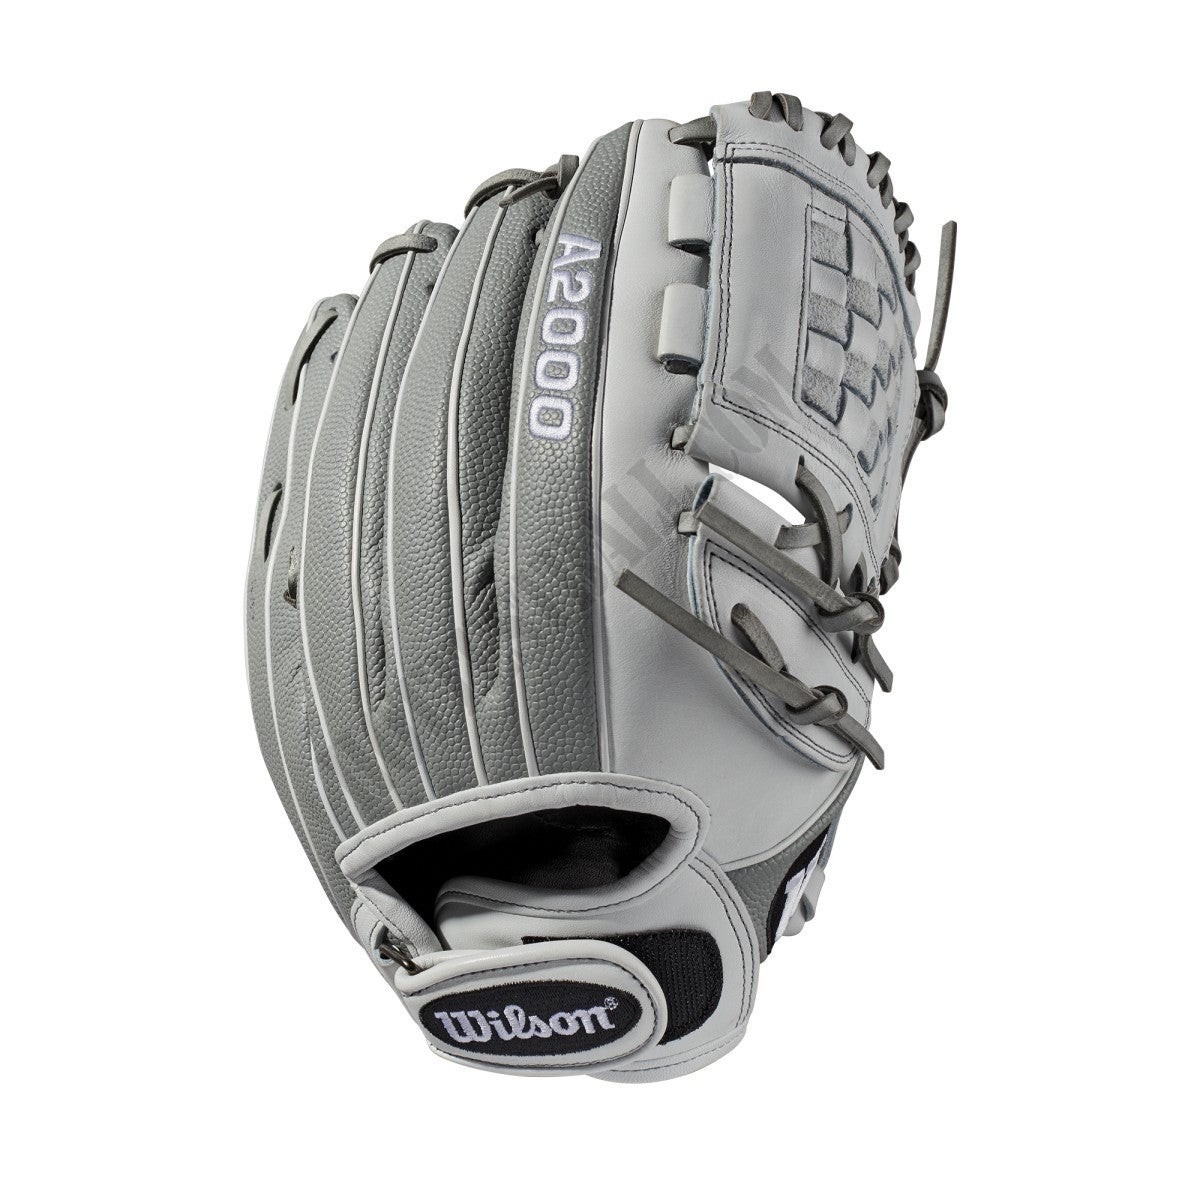 2019 A2000 P12 12" Pitcher's Fastpitch Glove ● Wilson Promotions - -8